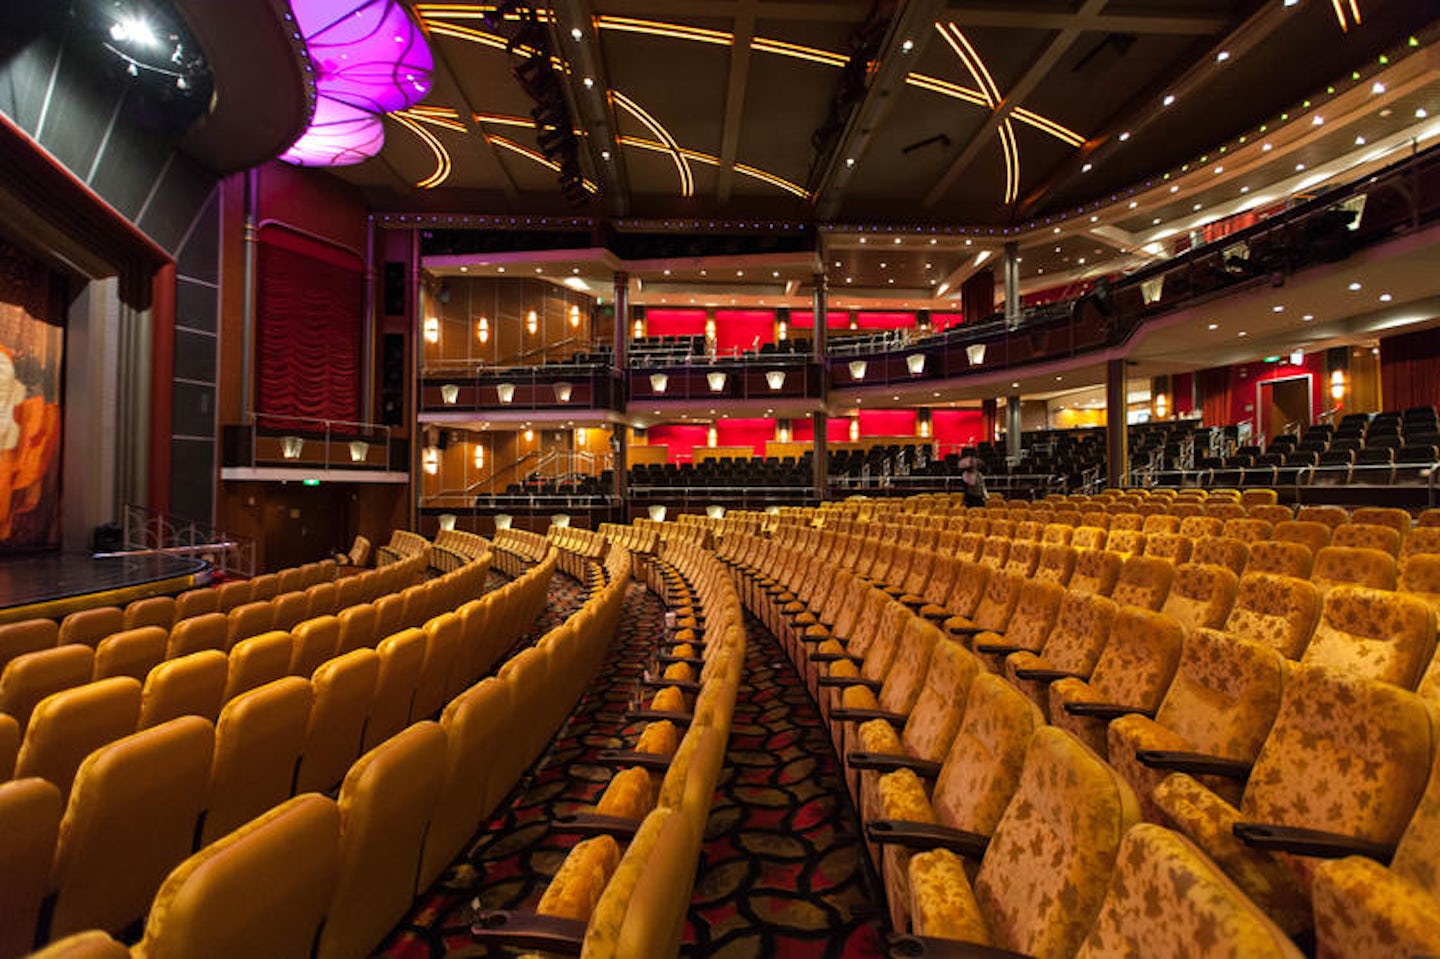 Alhambra Theatre on Independence of the Seas